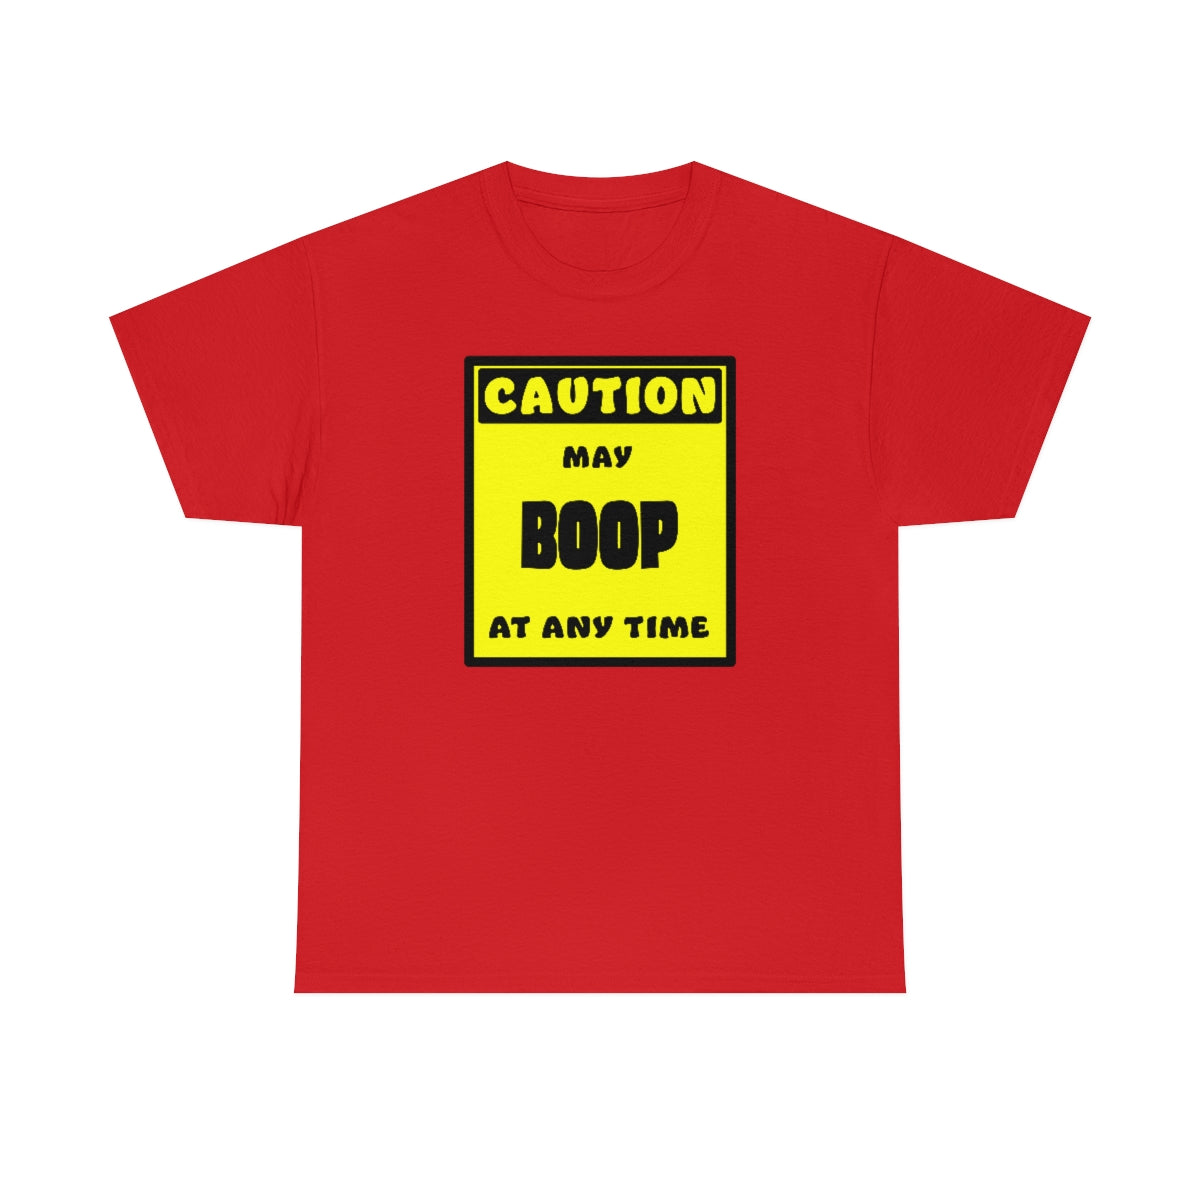 CAUTION! May BOOP at any time! - T-Shirt T-Shirt AFLT-Whootorca Red S 